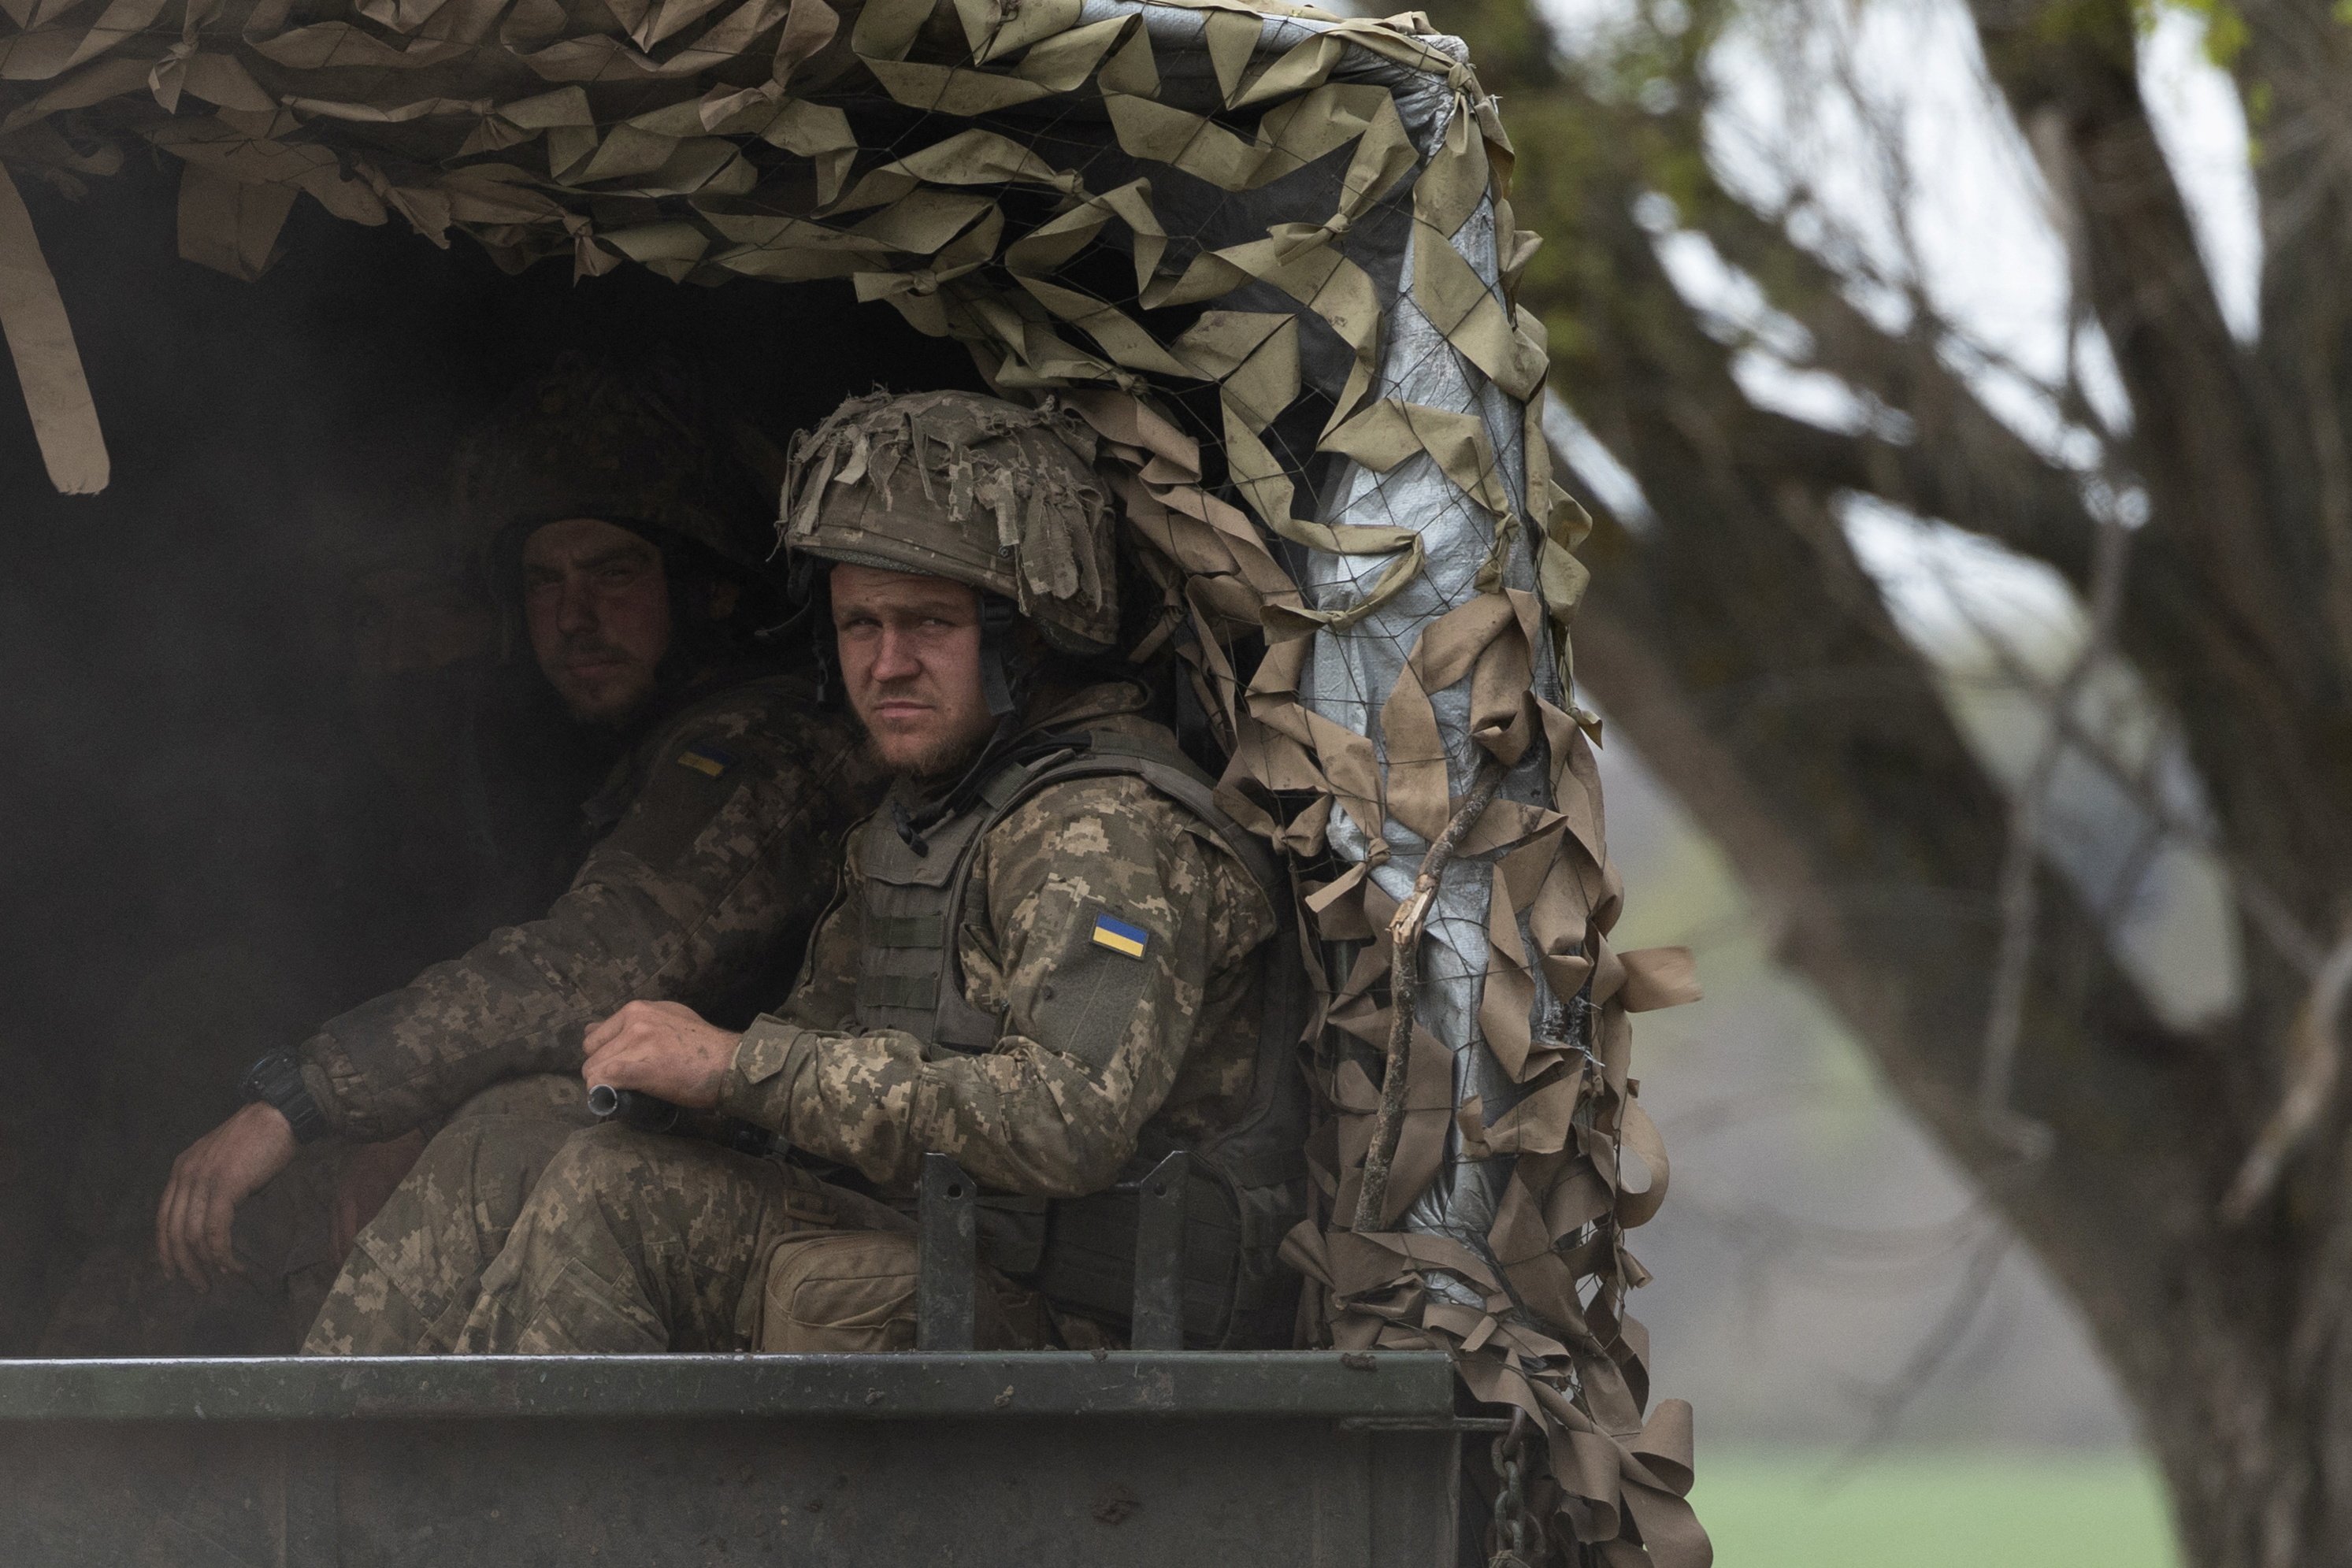 Ukrainian soldiers ride in a military vehicle to the front line during a fight, amid Russia's invasion in Ukraine, near Izyum